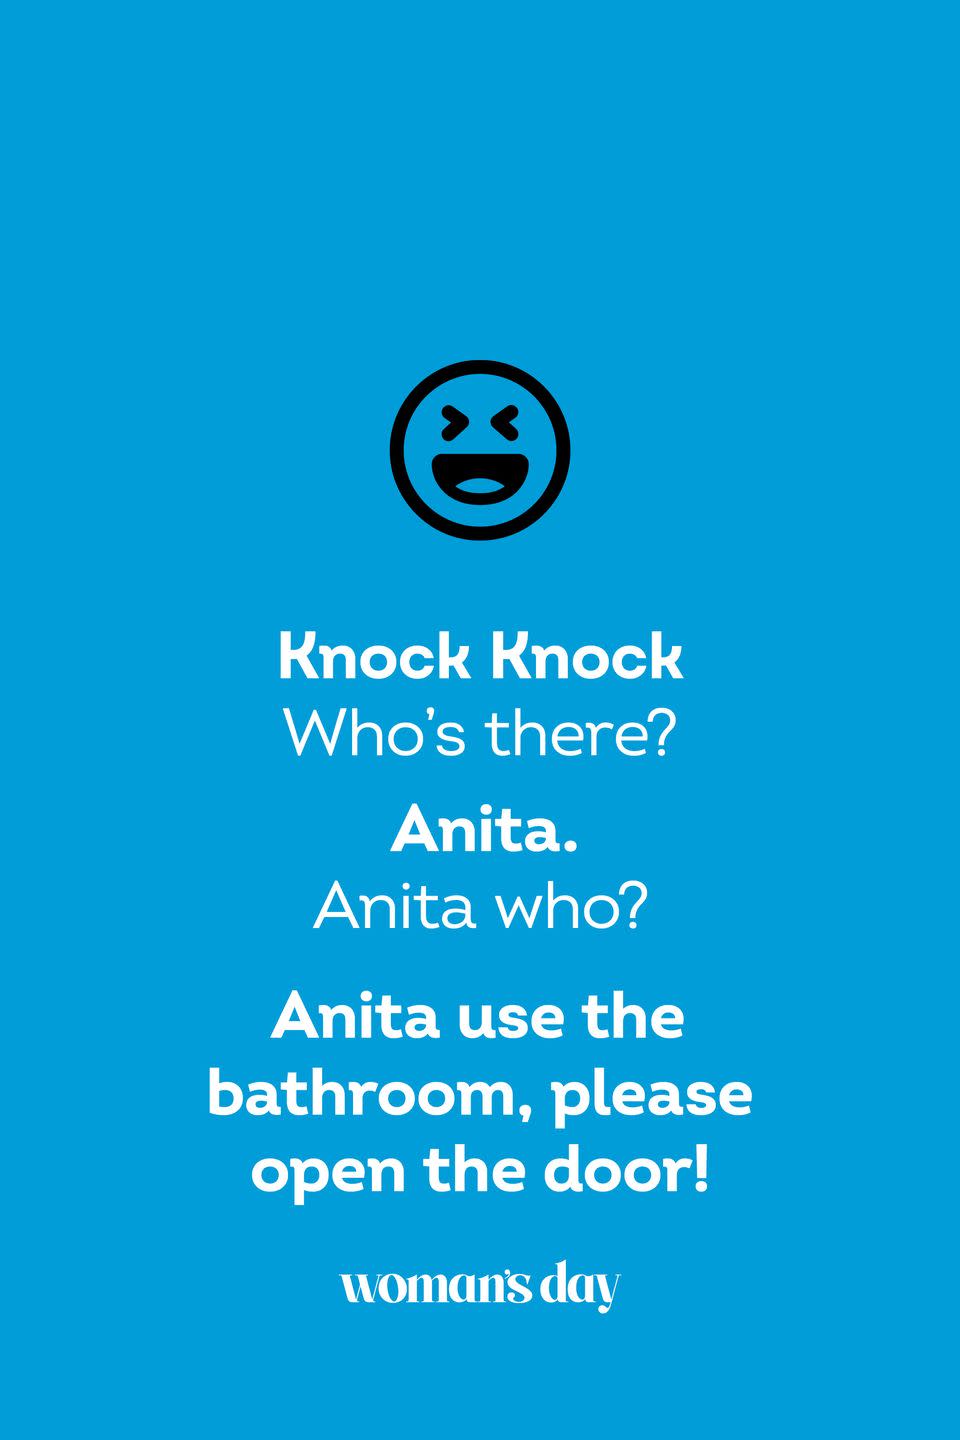 <p><strong>Knock Knock.</strong></p><p><em>Who’s there?</em></p><p><strong>Anita.</strong></p><p><em>Anita who?</em></p><p><strong>Anita use the bathroom, please open the door!</strong></p>